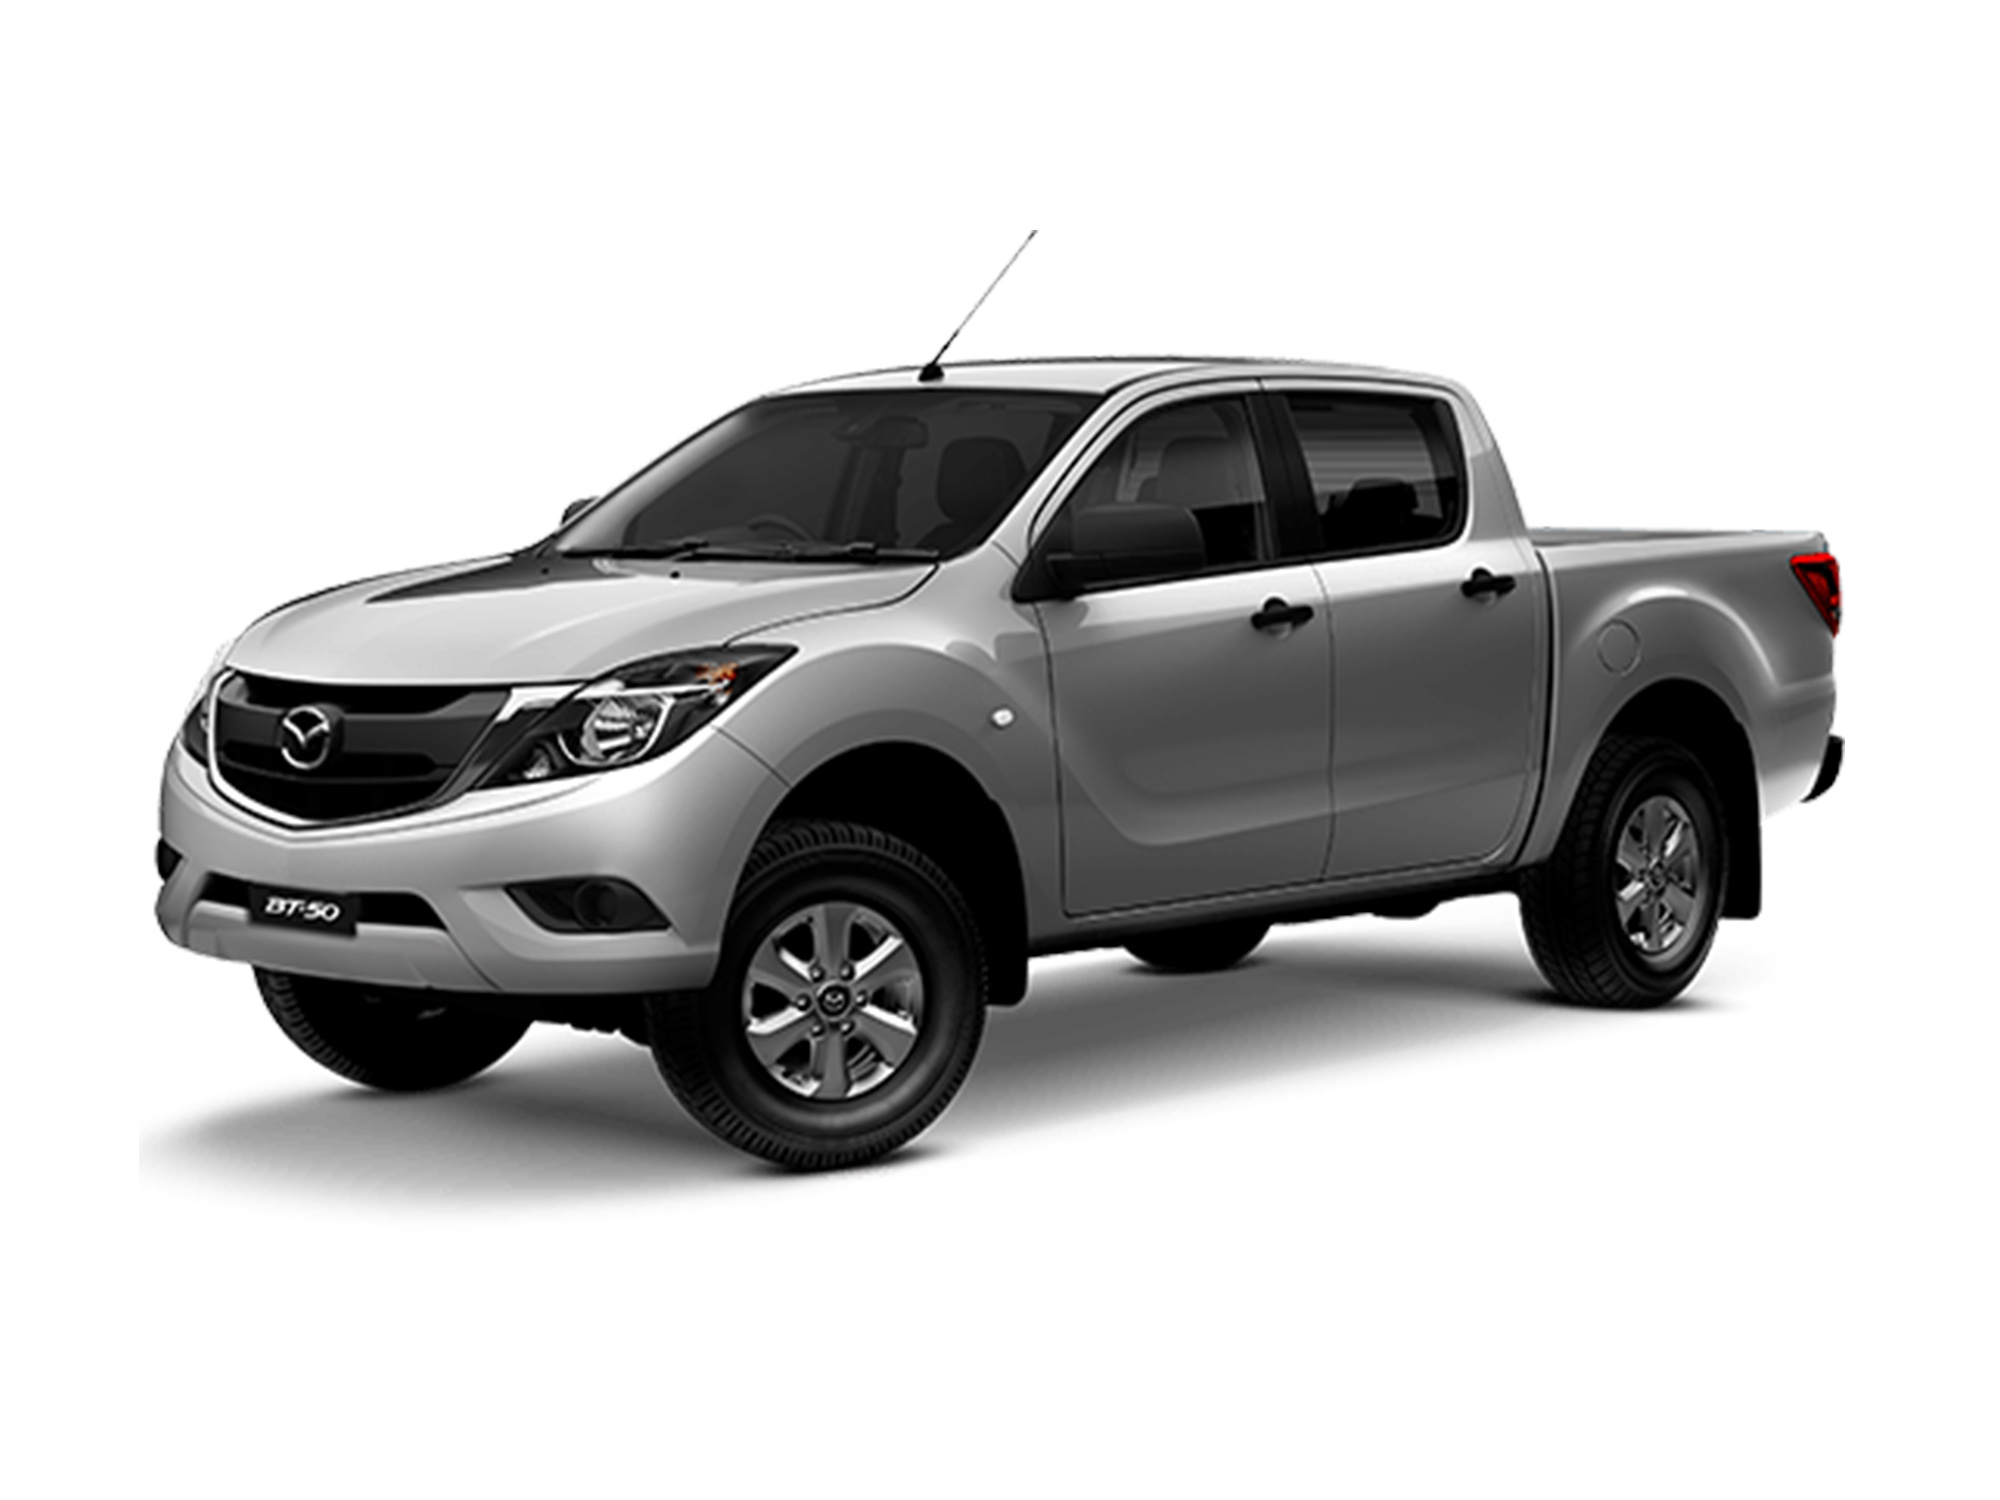 Mazda Bt-50 Buyers set to Get Free Fuel from Shell